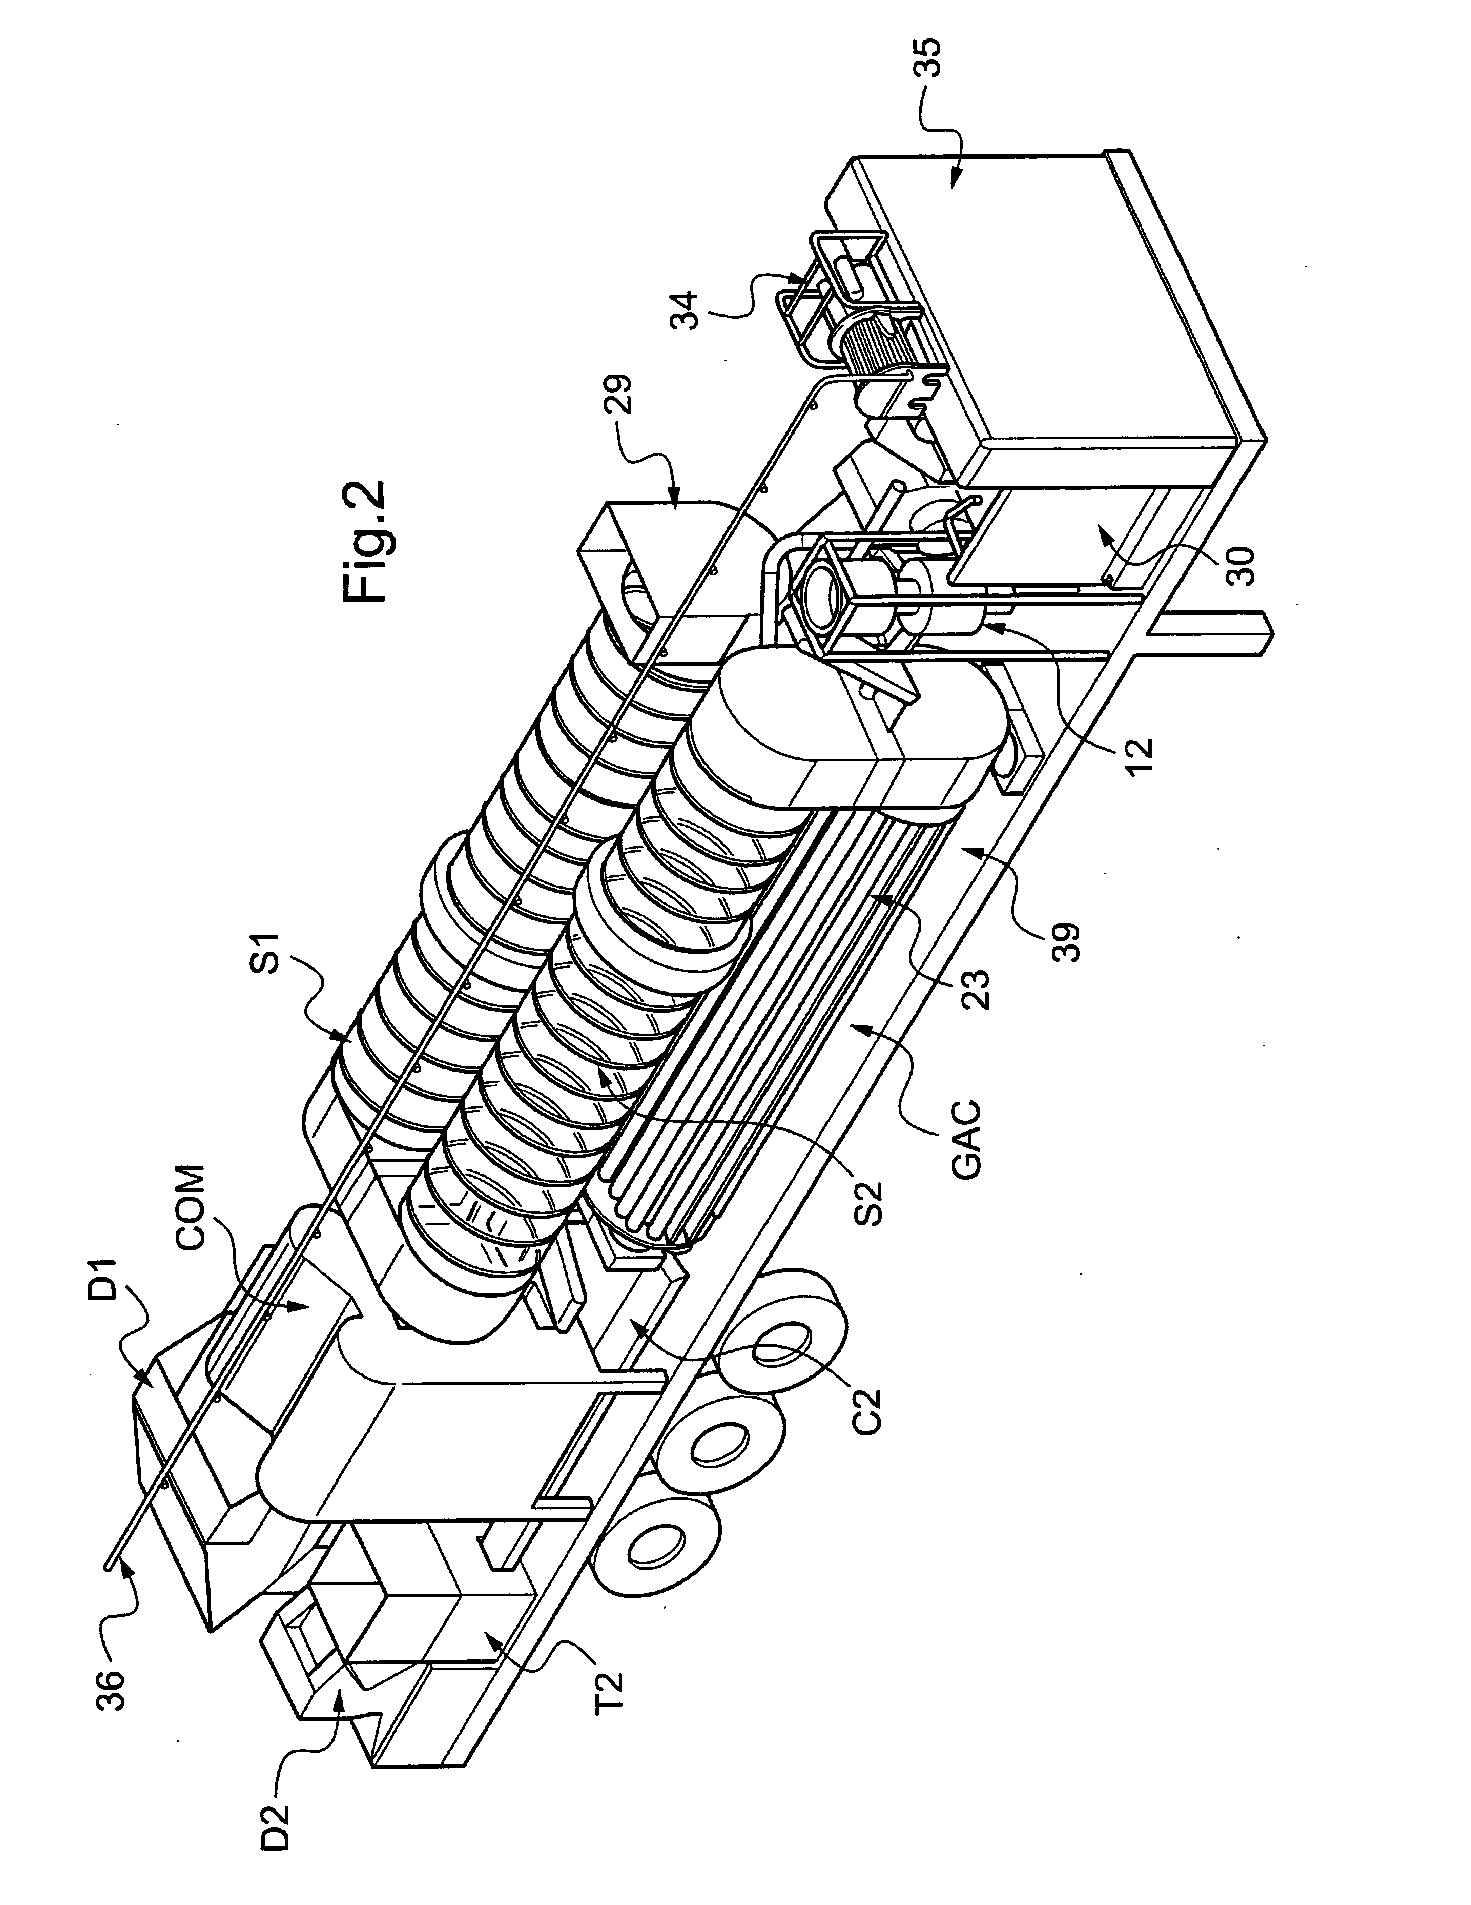 Equipment for producing granules from plants